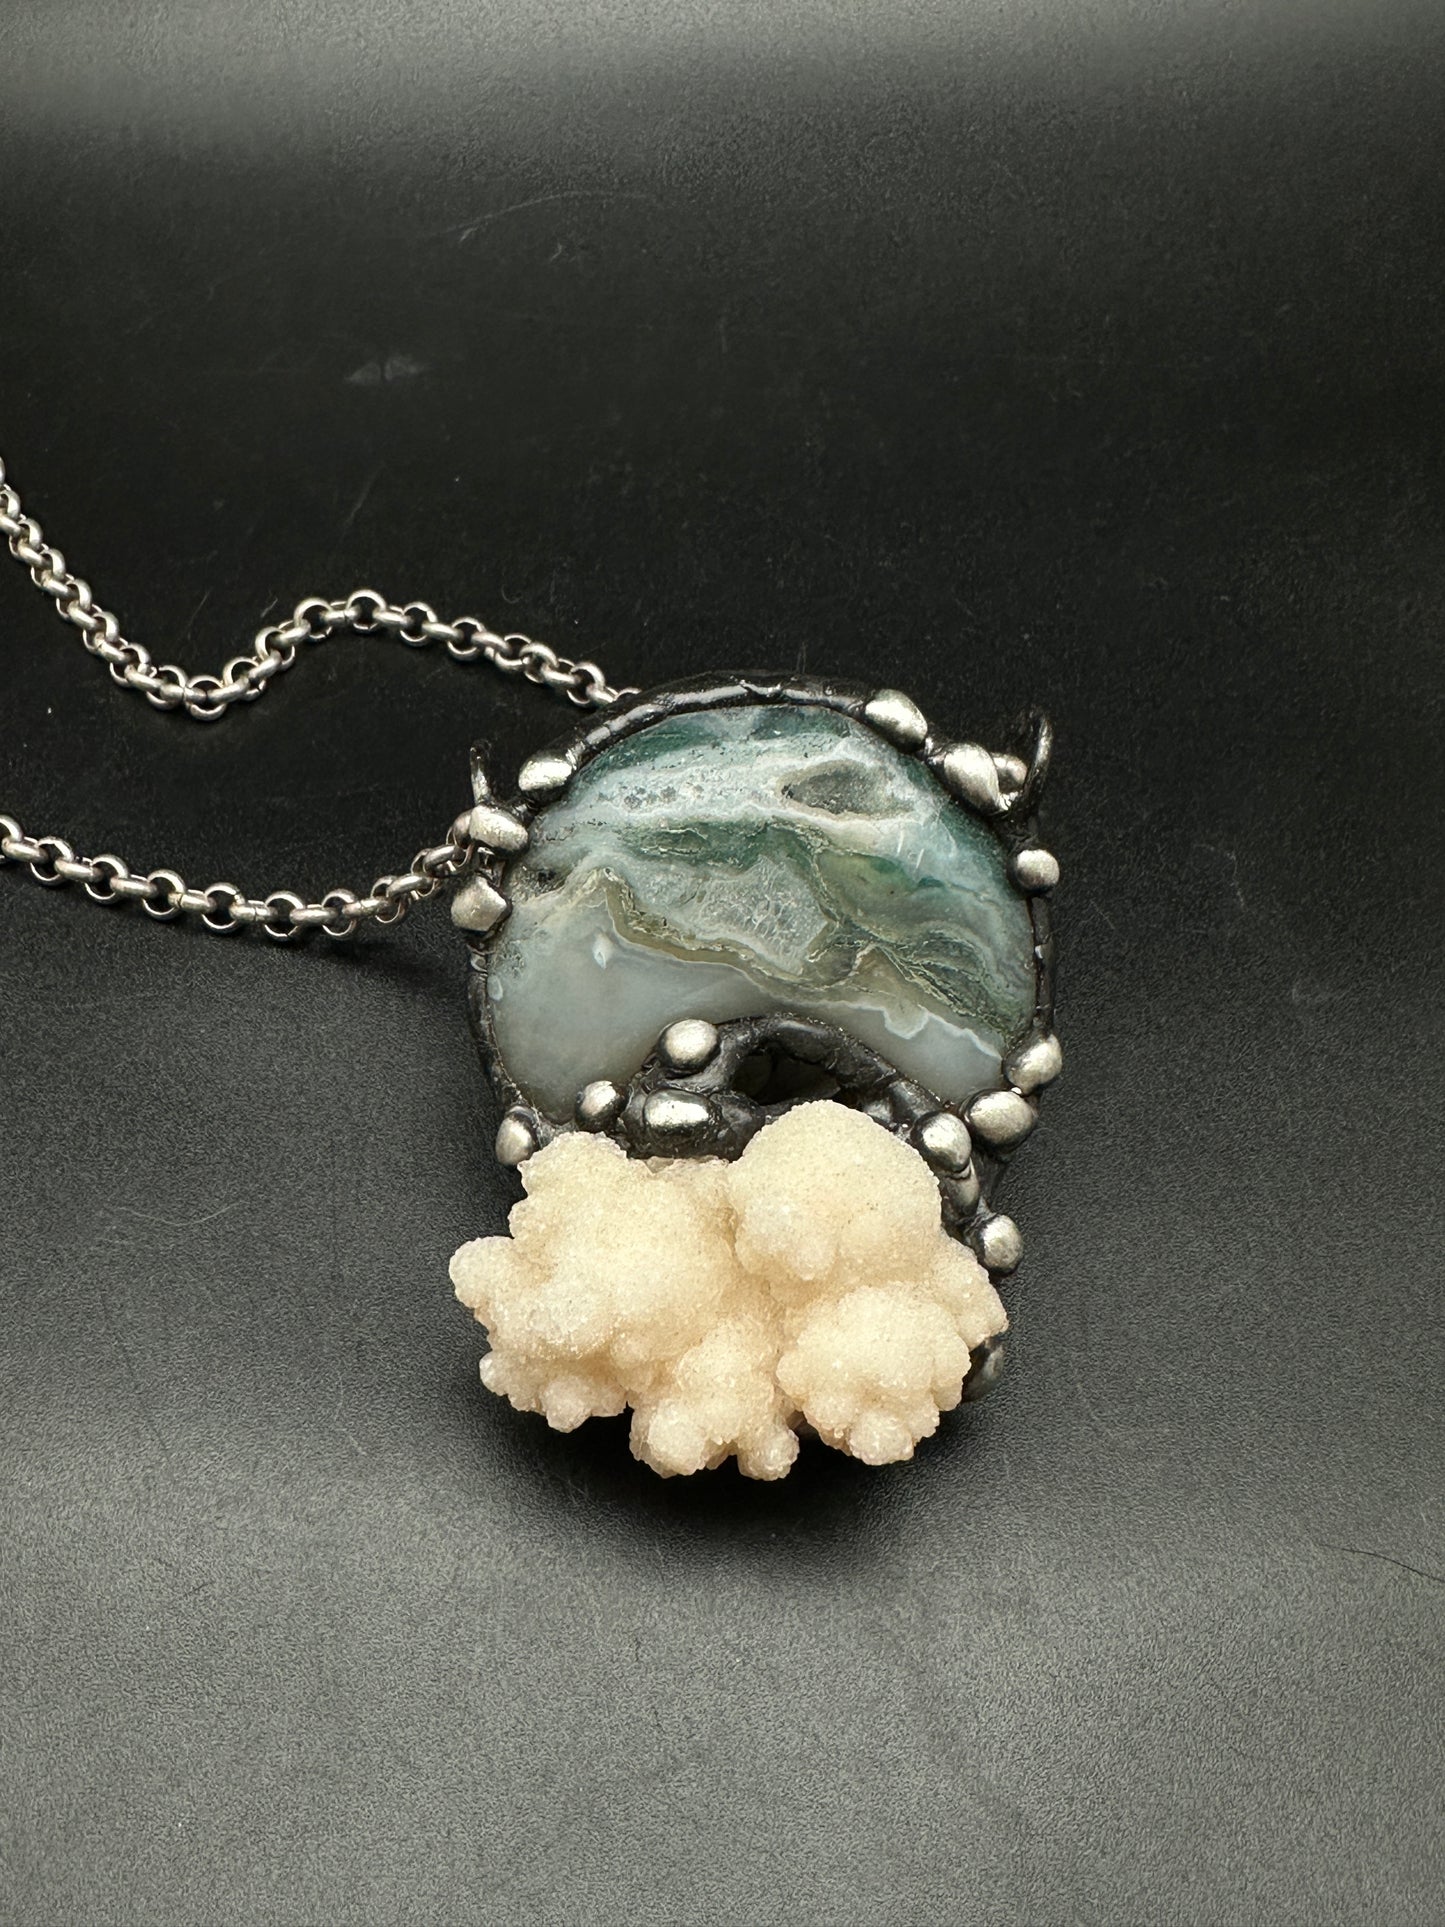 In The Clouds ~ Moss Agate & Calcium Stalactite Necklace